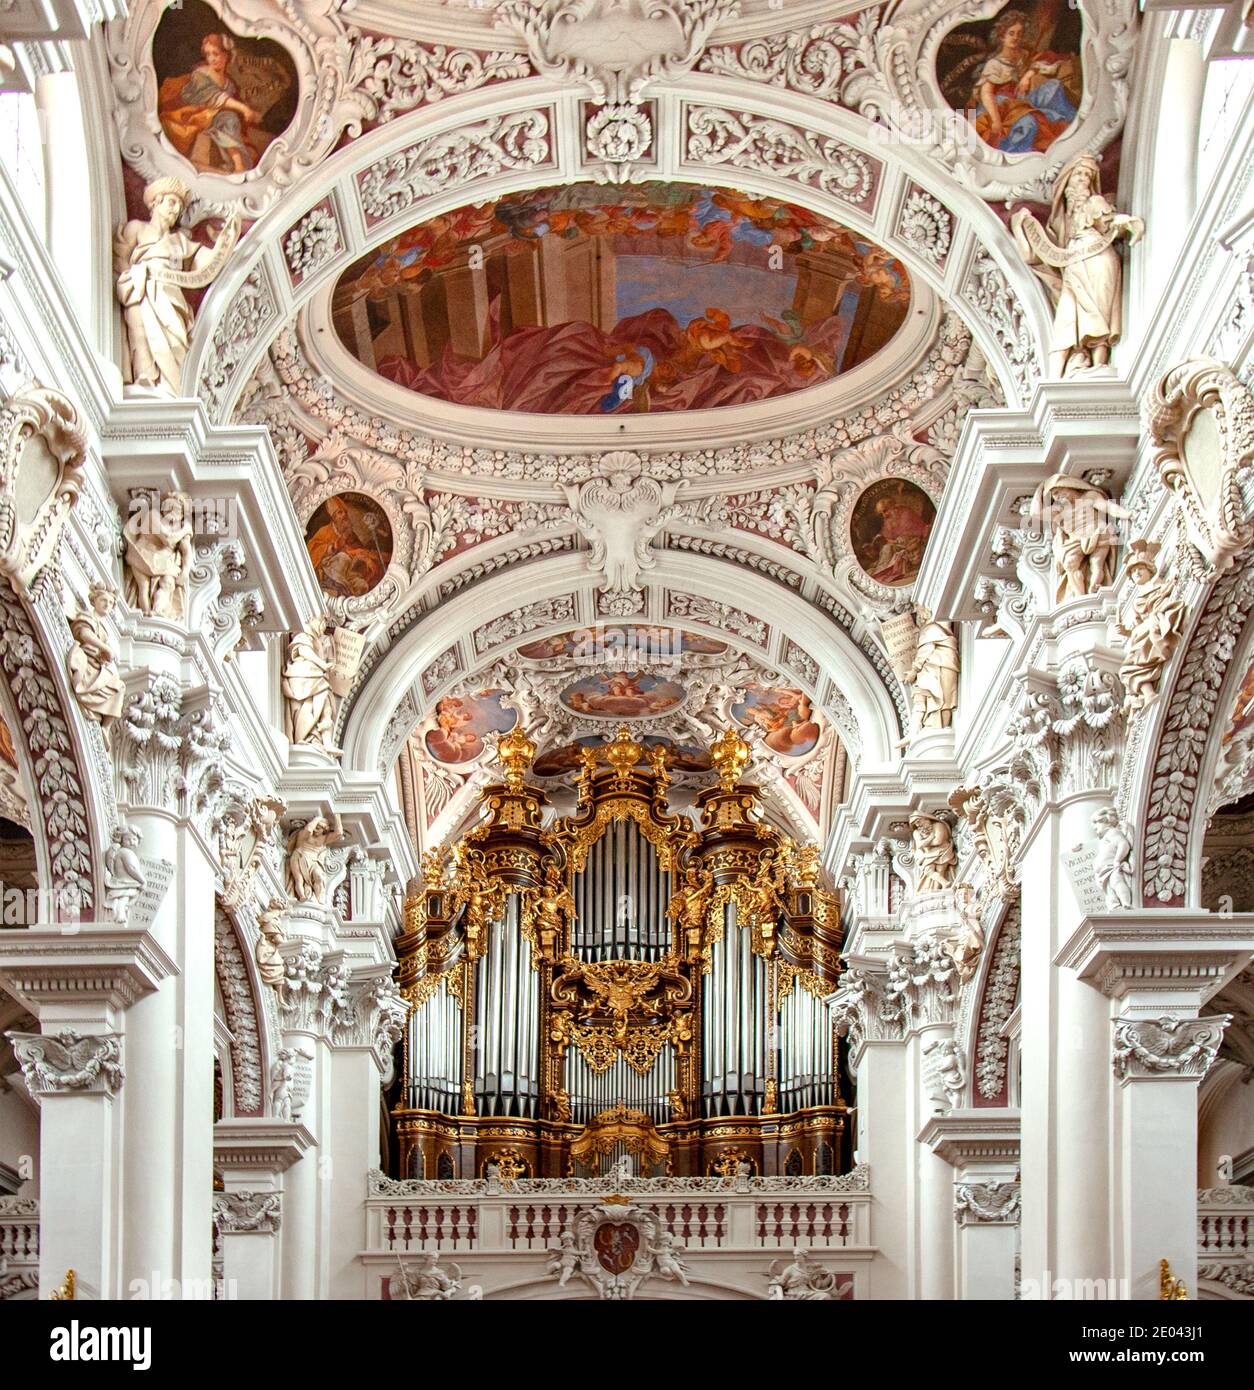 The Stephansdom (St. Stephen's Cathedral), Passau, Bavaria, Germany.  Overall the largest pipe organ in Europe, this shows only three of its five orga Stock Photo